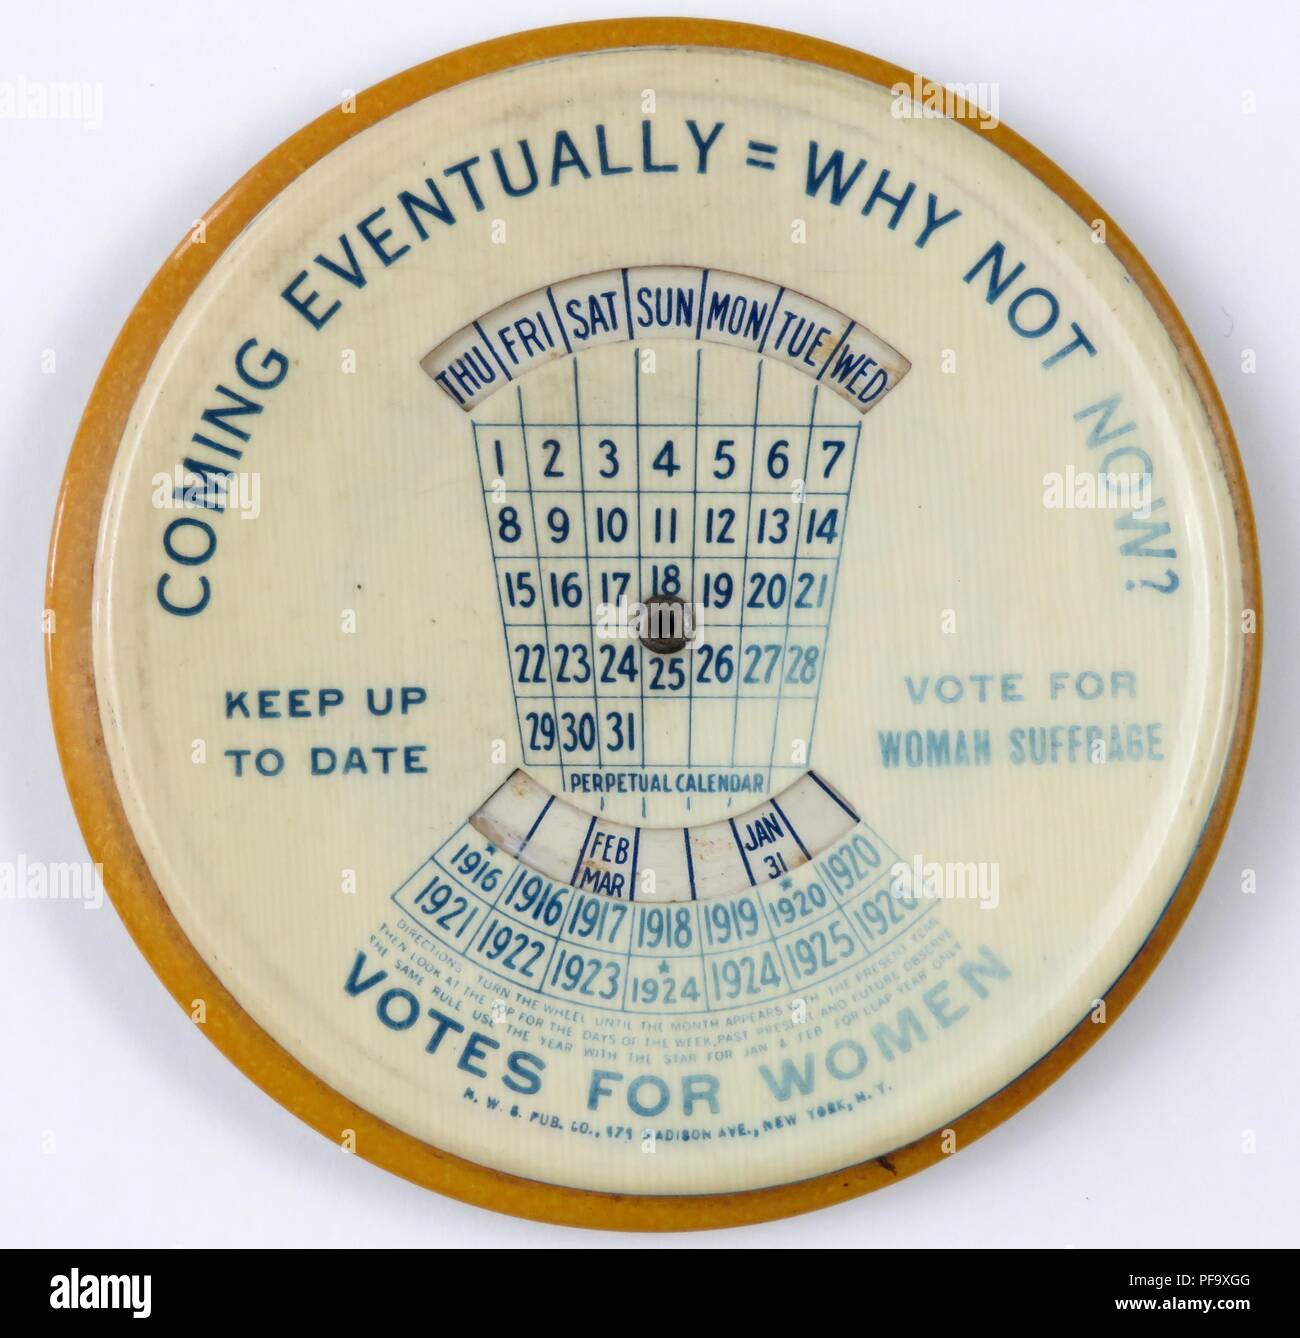 Perpetual suffrage calendar, with the message 'Coming Eventually = Why Not Now?' with moving parts and dual function as a paperweight and mirror, produced in New York, by the NW6 publishing Company for the American Market, 1915. Photography by Emilia van Beugen. () Stock Photo